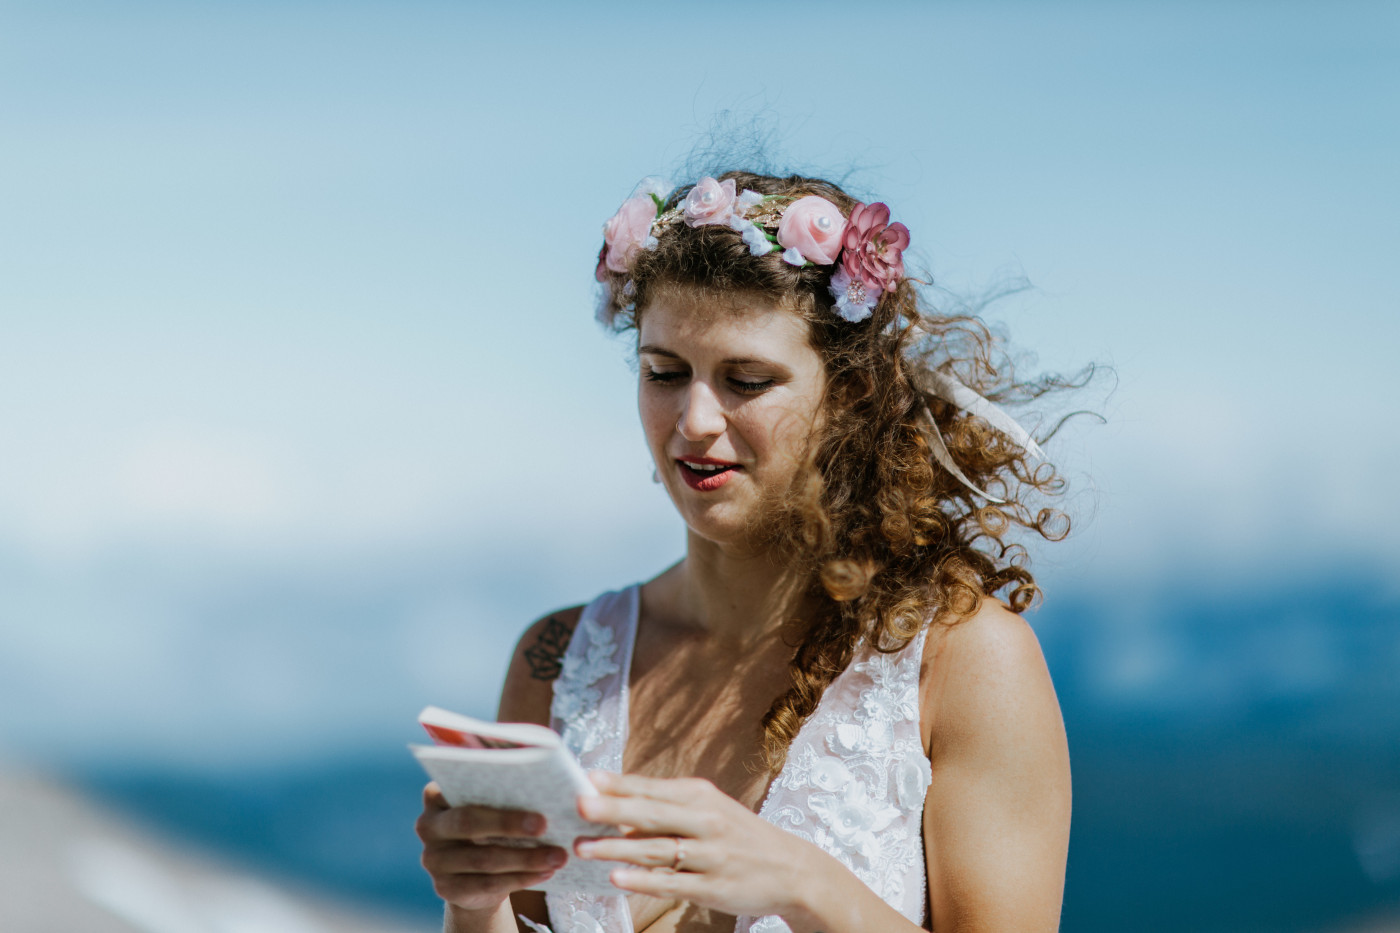 Heather reads her vows to Margaux. Elopement photography at Mount Hood by Sienna Plus Josh.